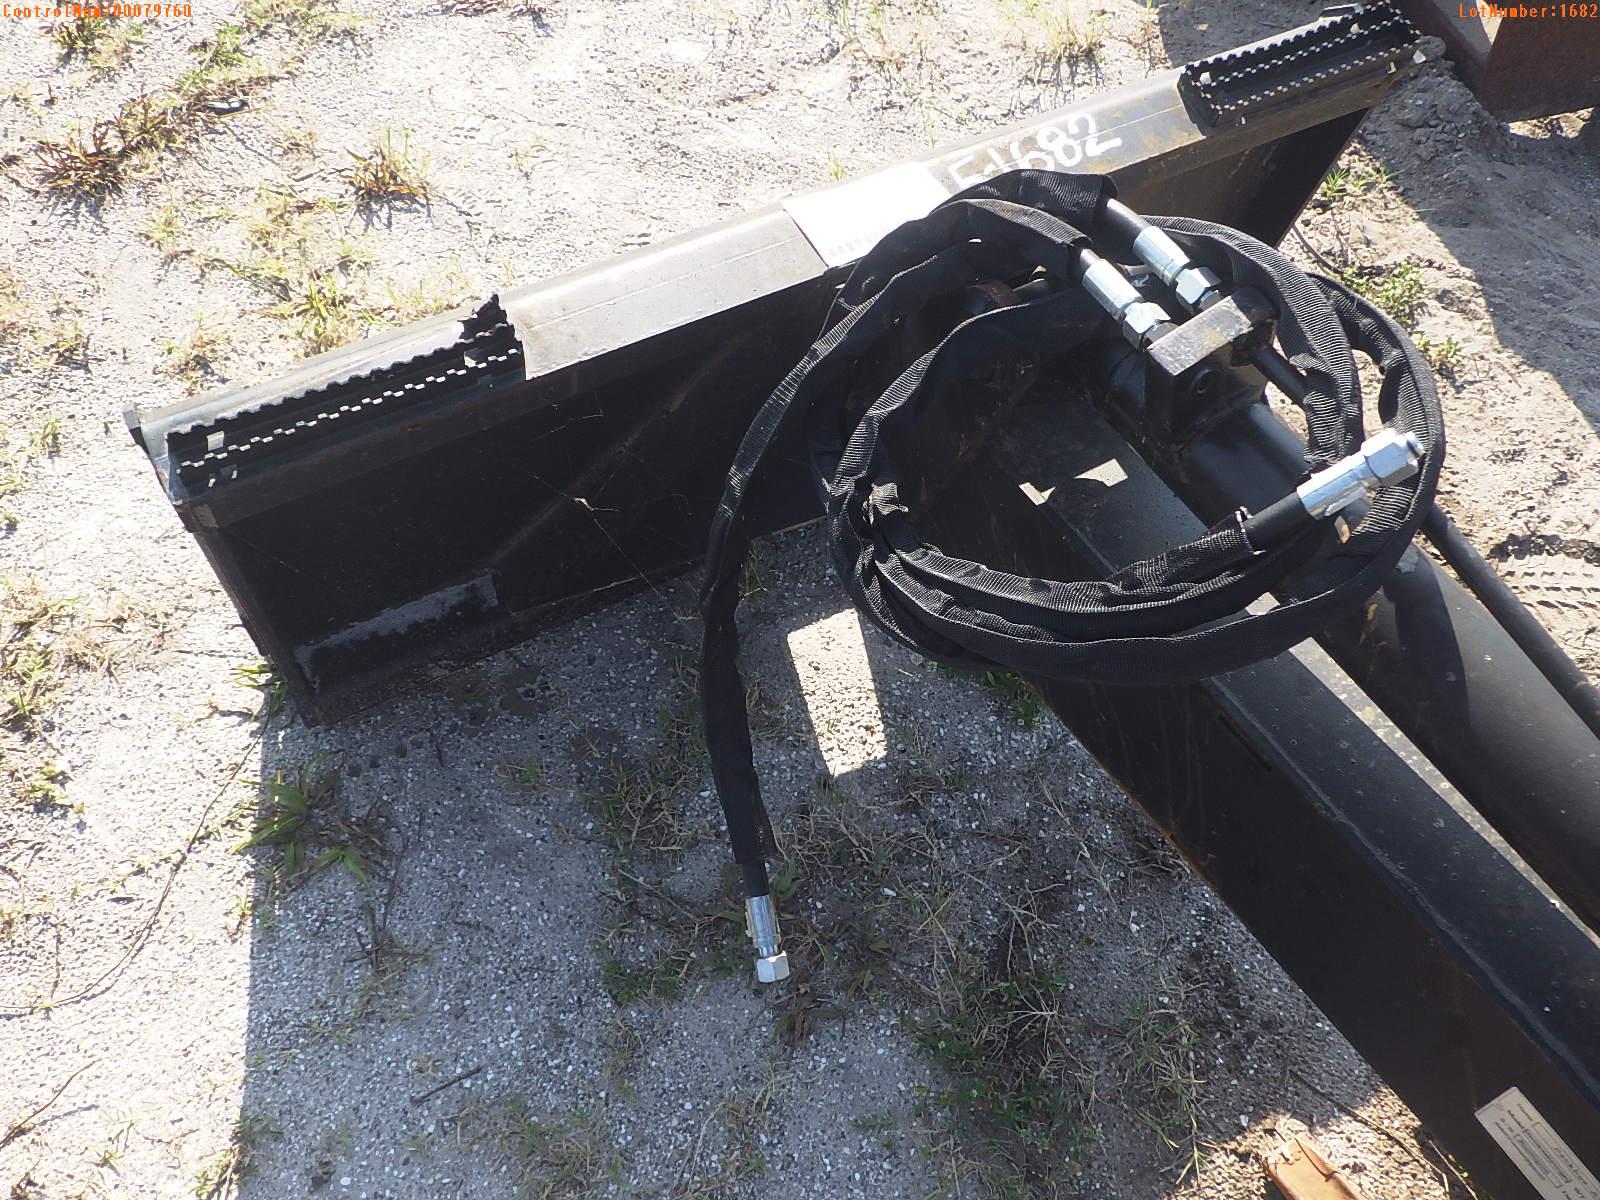 5-01682 (Equip.-Implement misc.)  Seller:Private/Dealer QUICK CONNECT SKID STEER